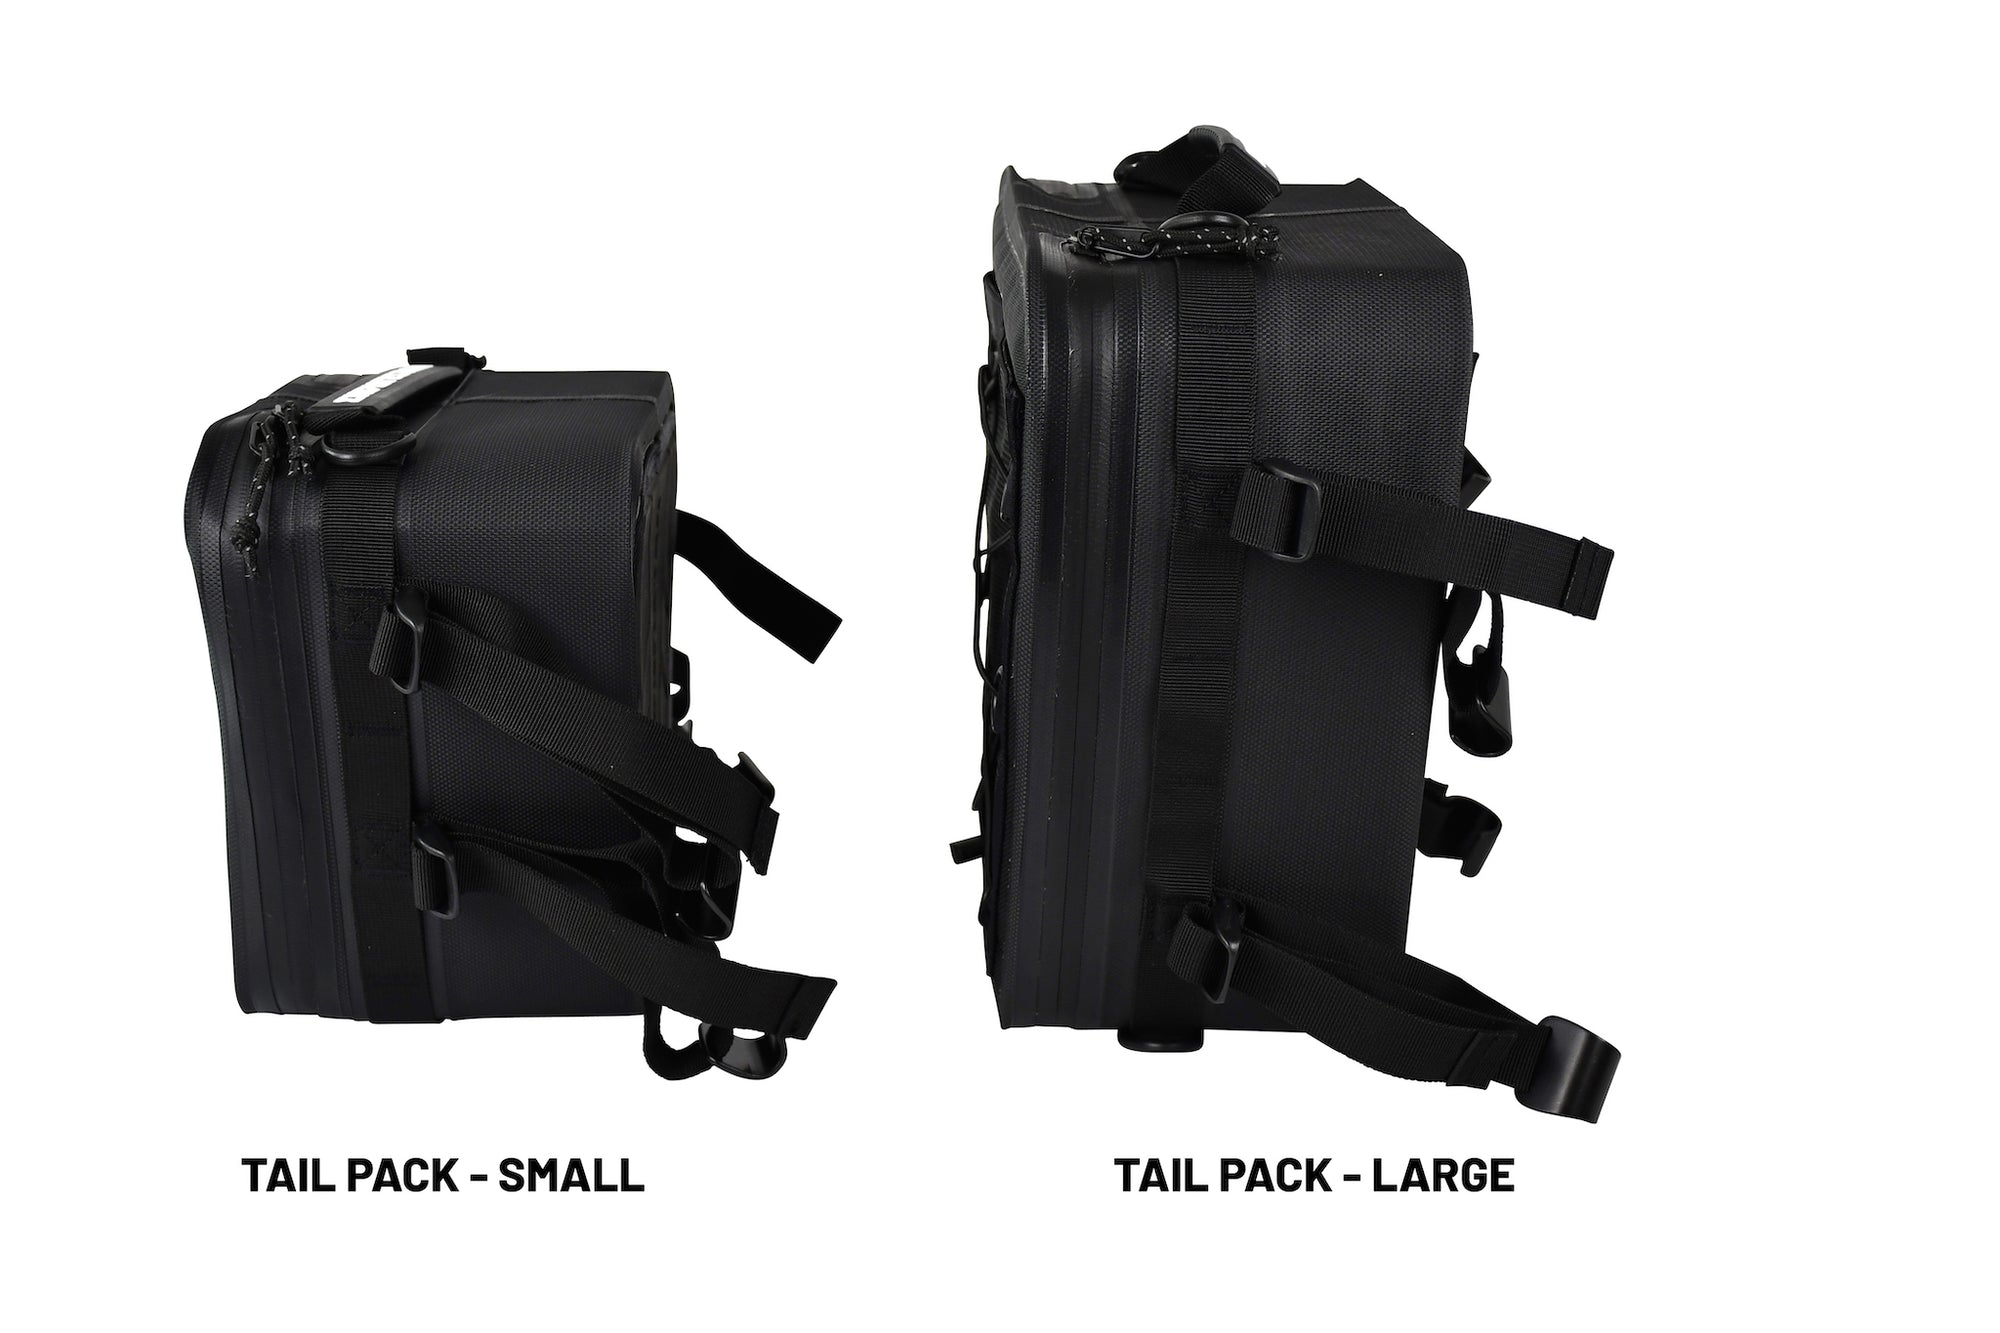 Hecktasche Tail Pack - Large